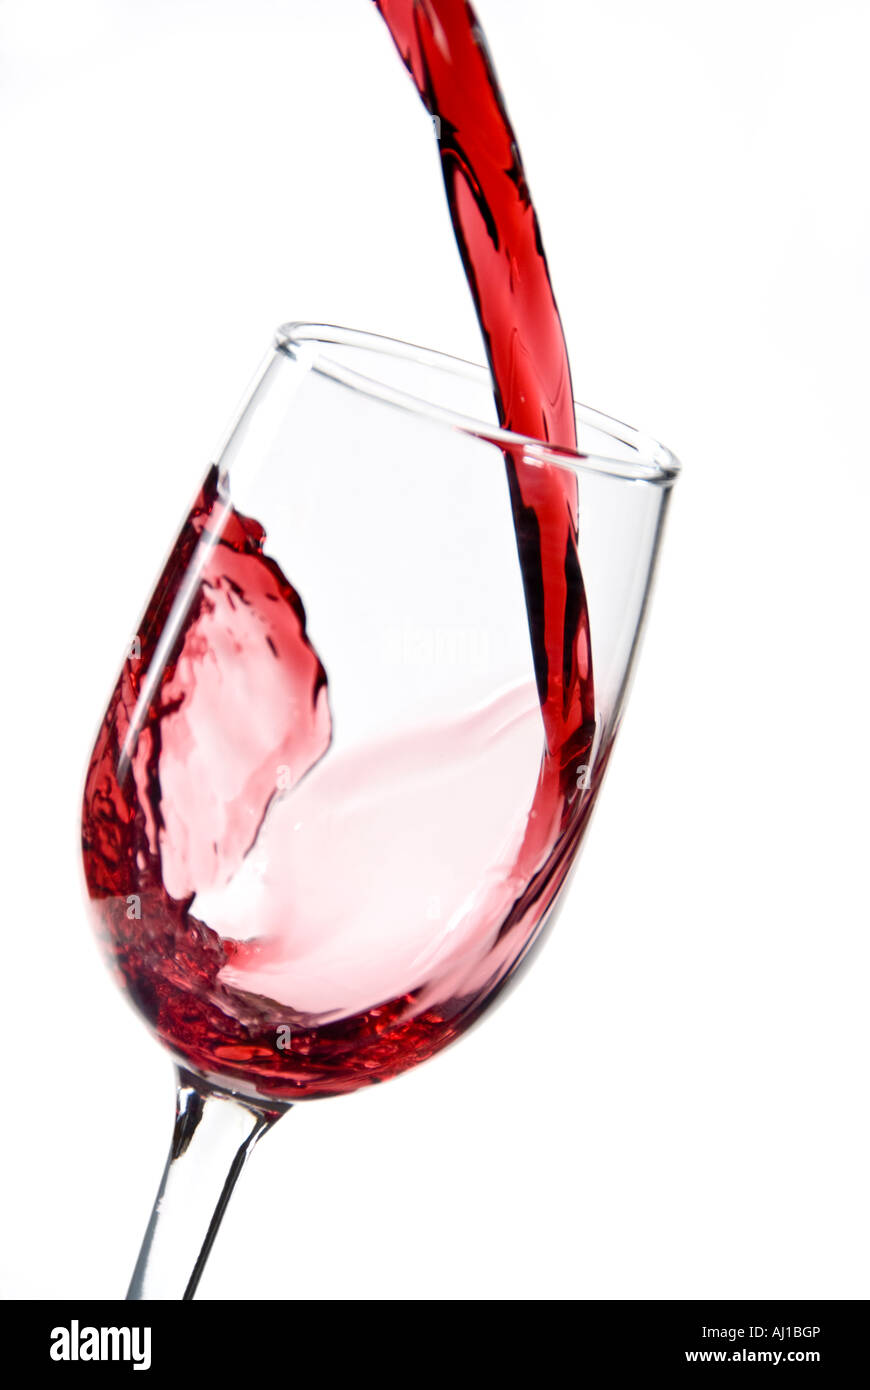 Pouring a glass of red wine into a wine glass Stock Photo